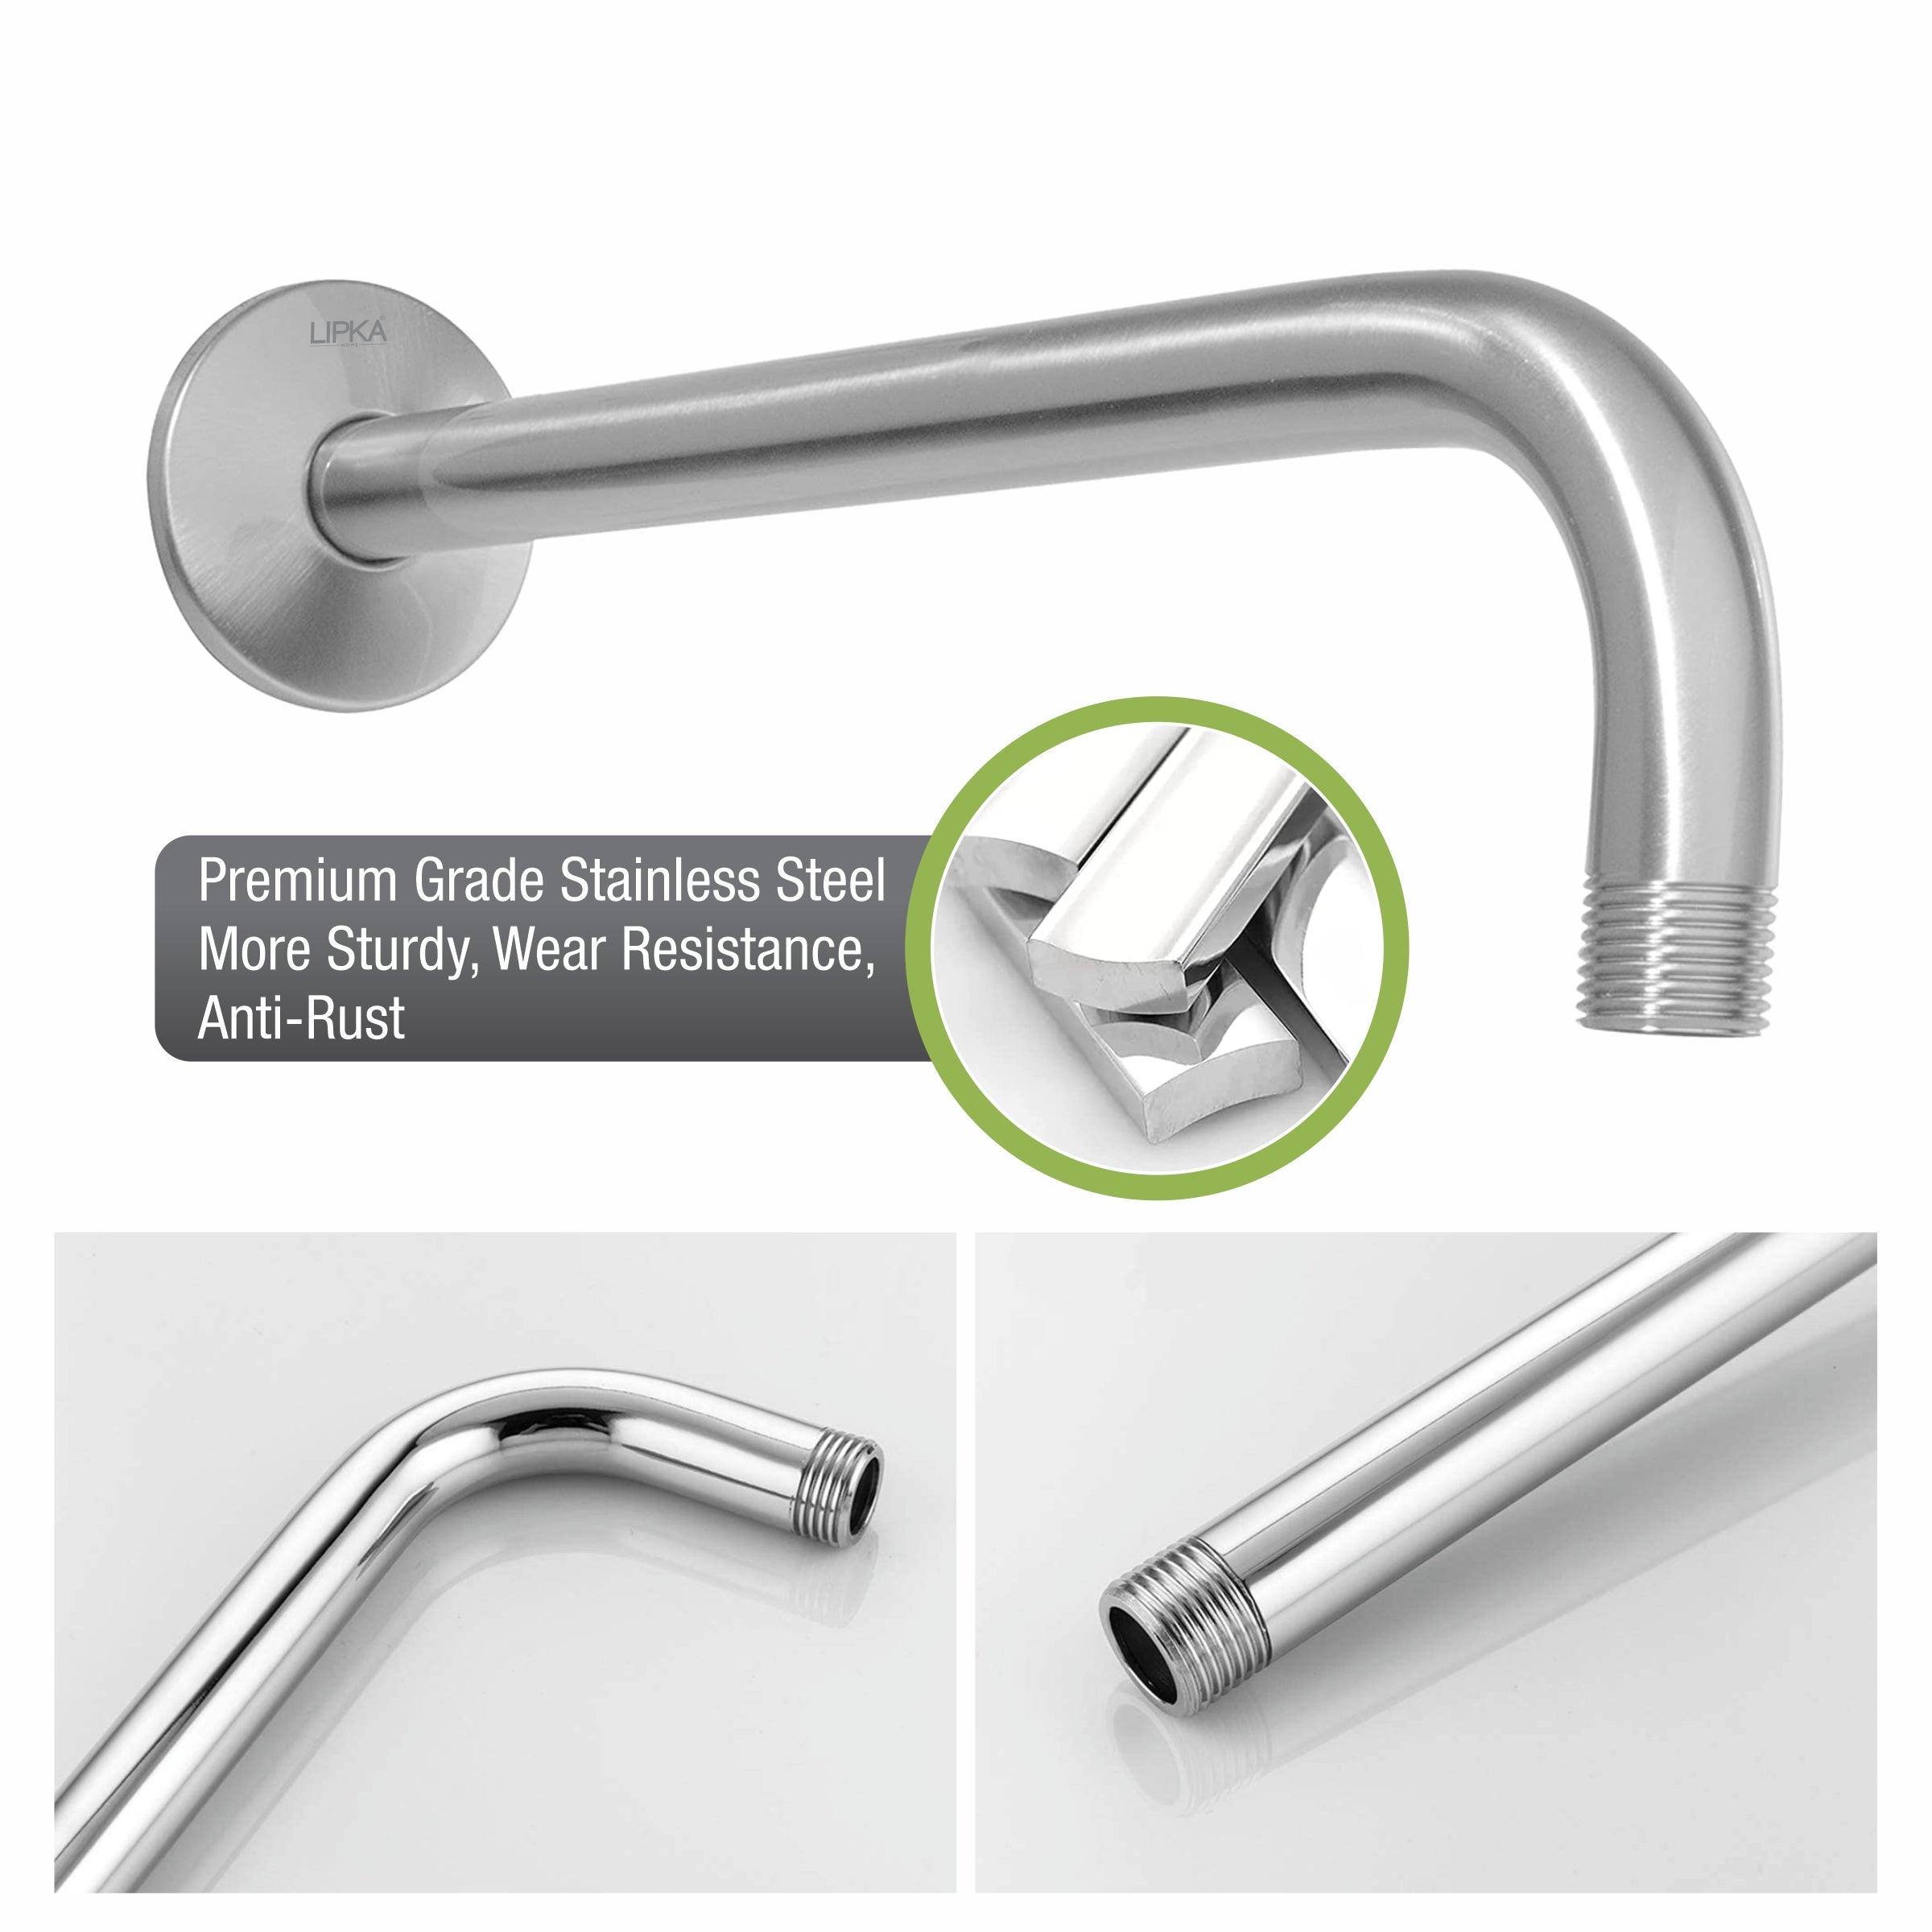 Full Bend Round Shower Arm (24 Inches) premium stainless steel